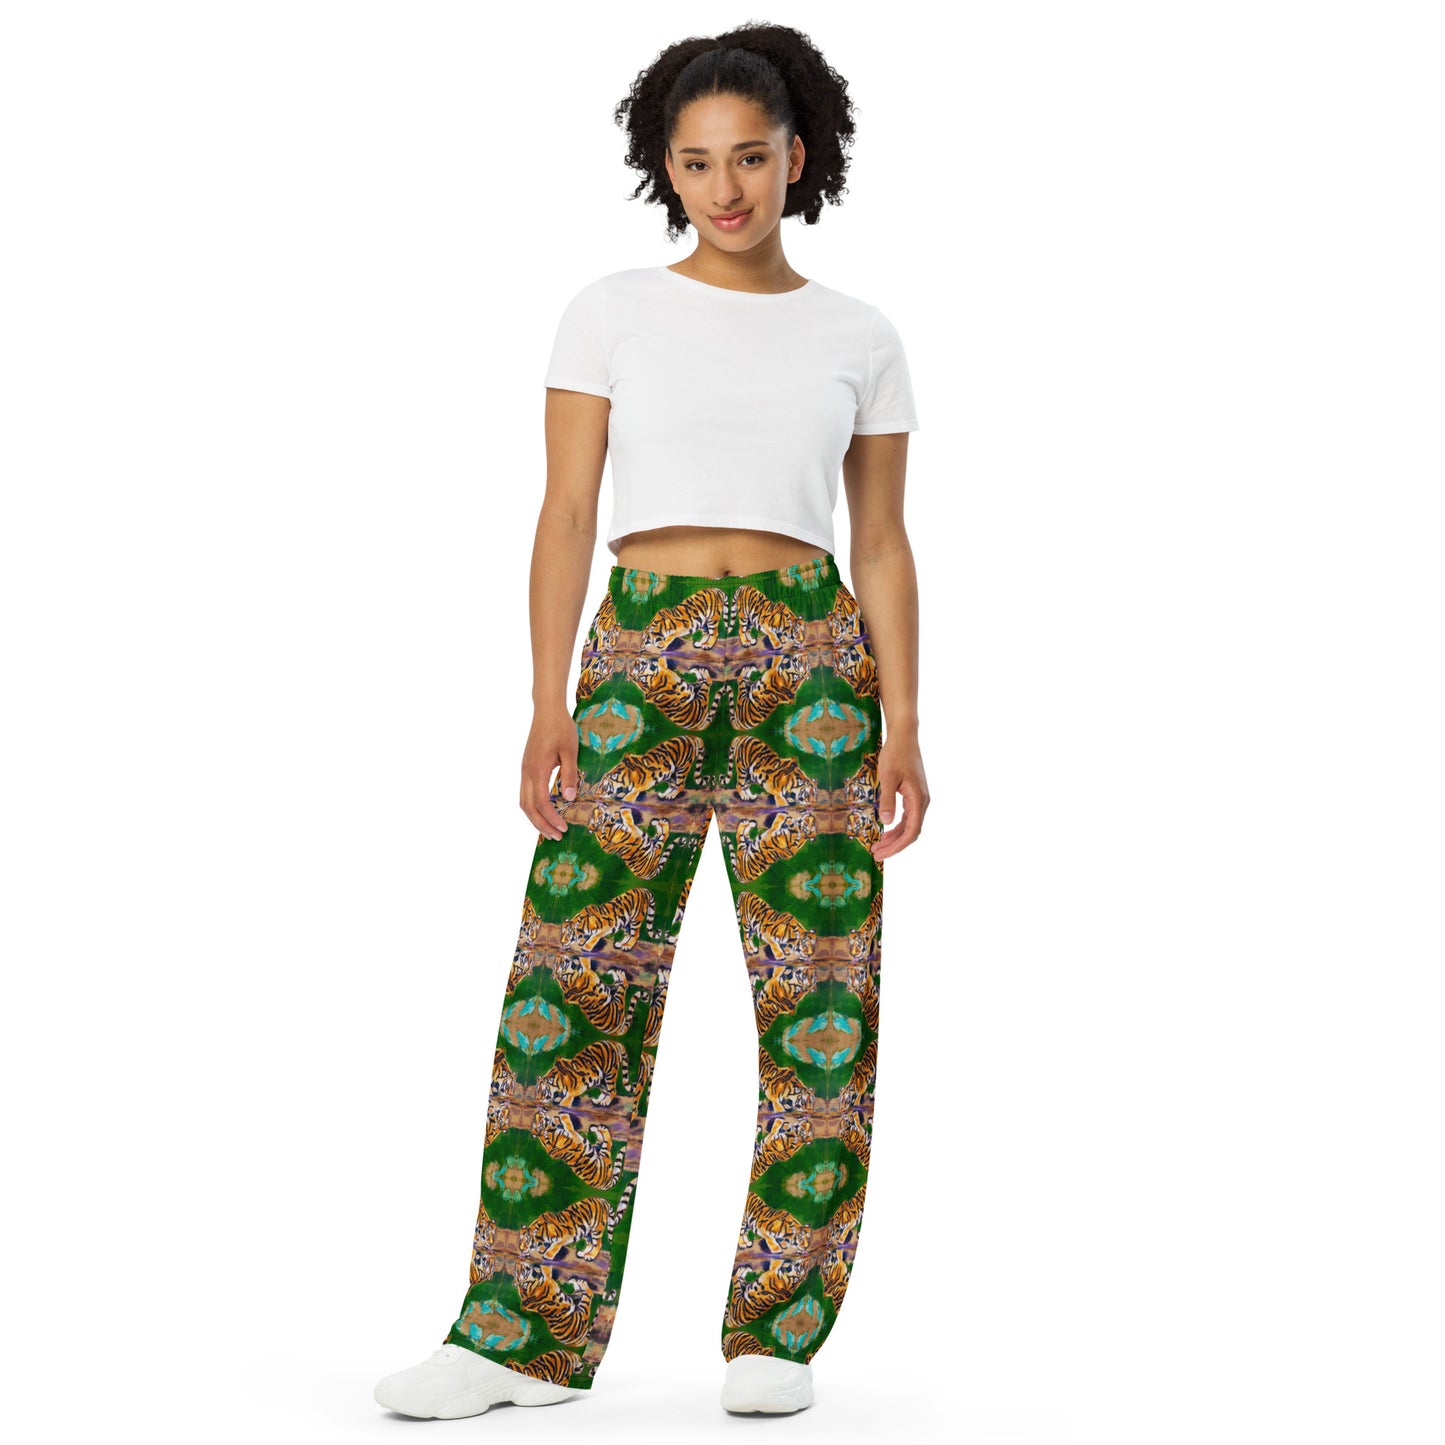 Tiger Reflections All-over print unisex wide-leg pants